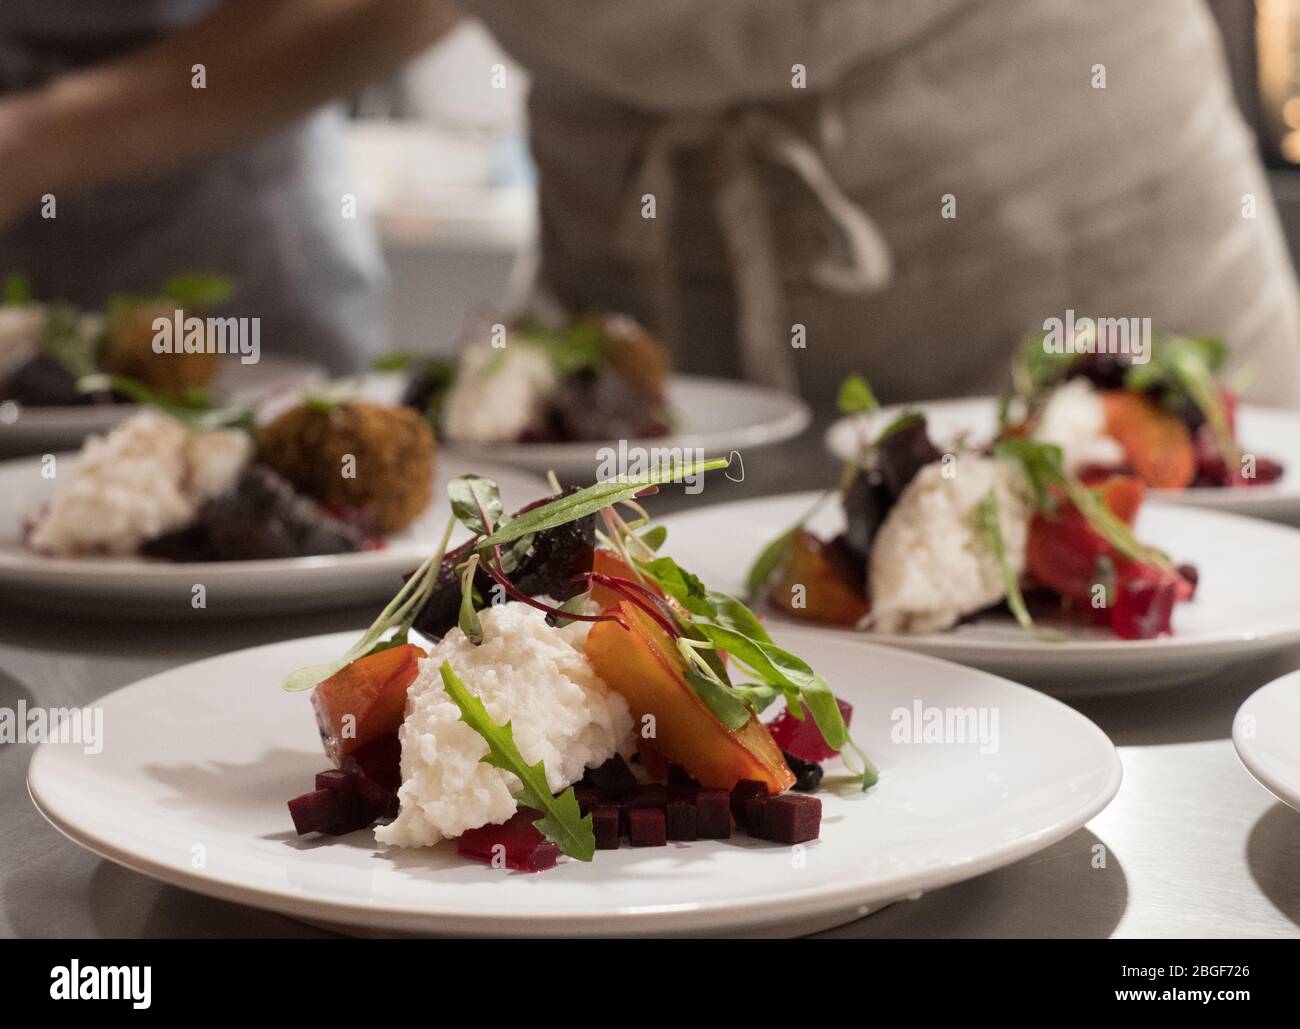 Roasted root vegetables with a horseradish and celeriac remoulade, being plated up at a supper club Stock Photo